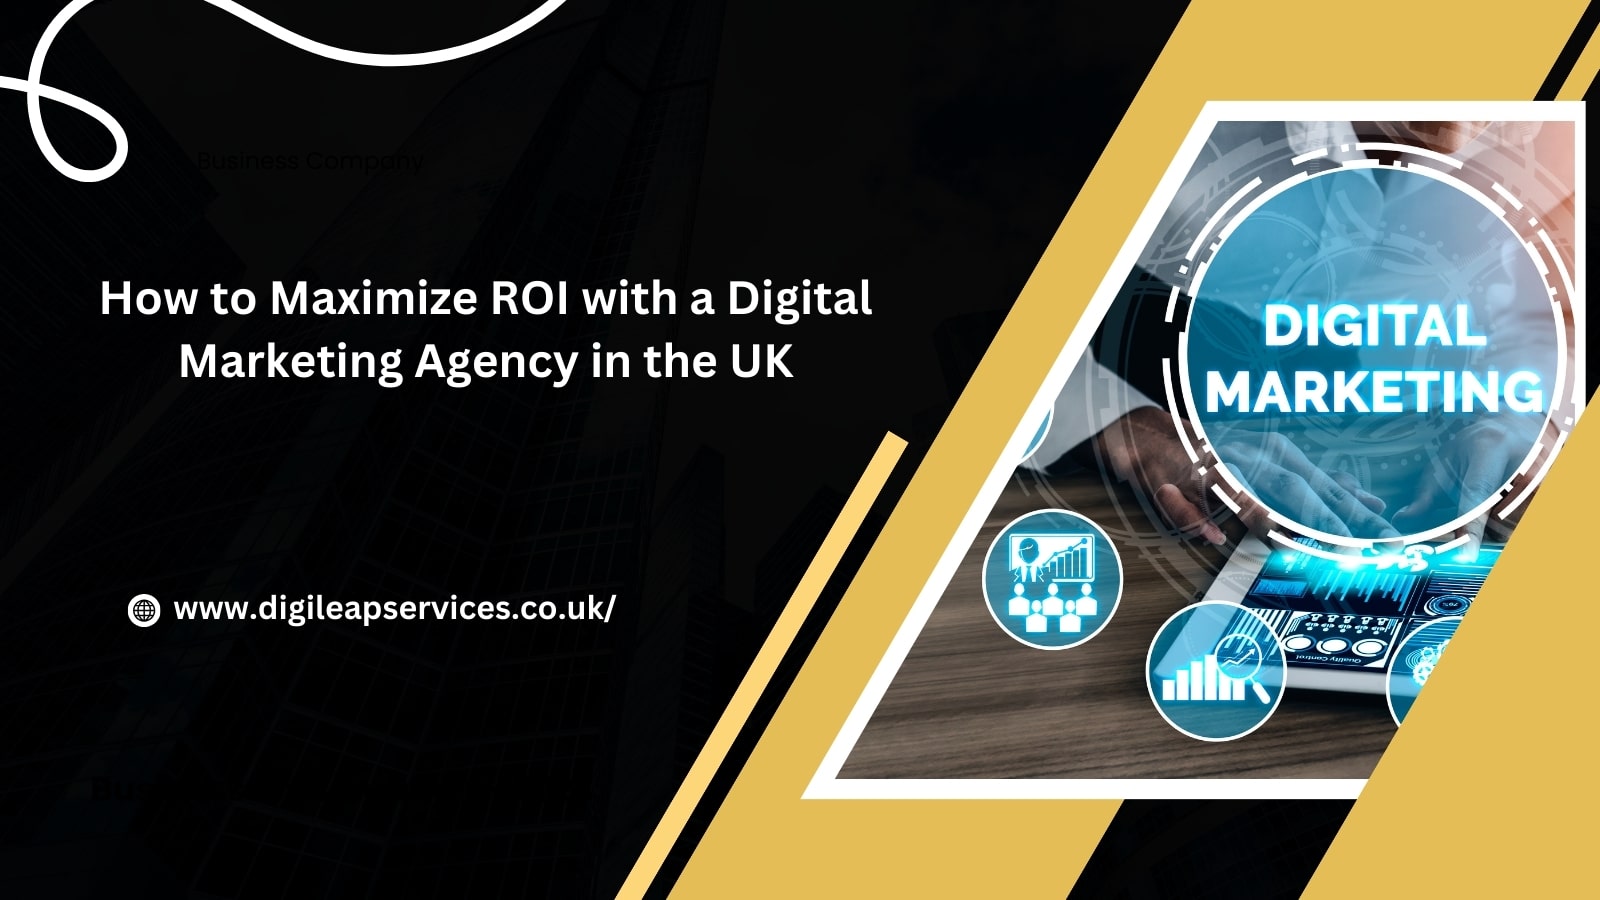 How to Maximize ROI with a Digital Marketing Agency in the UK